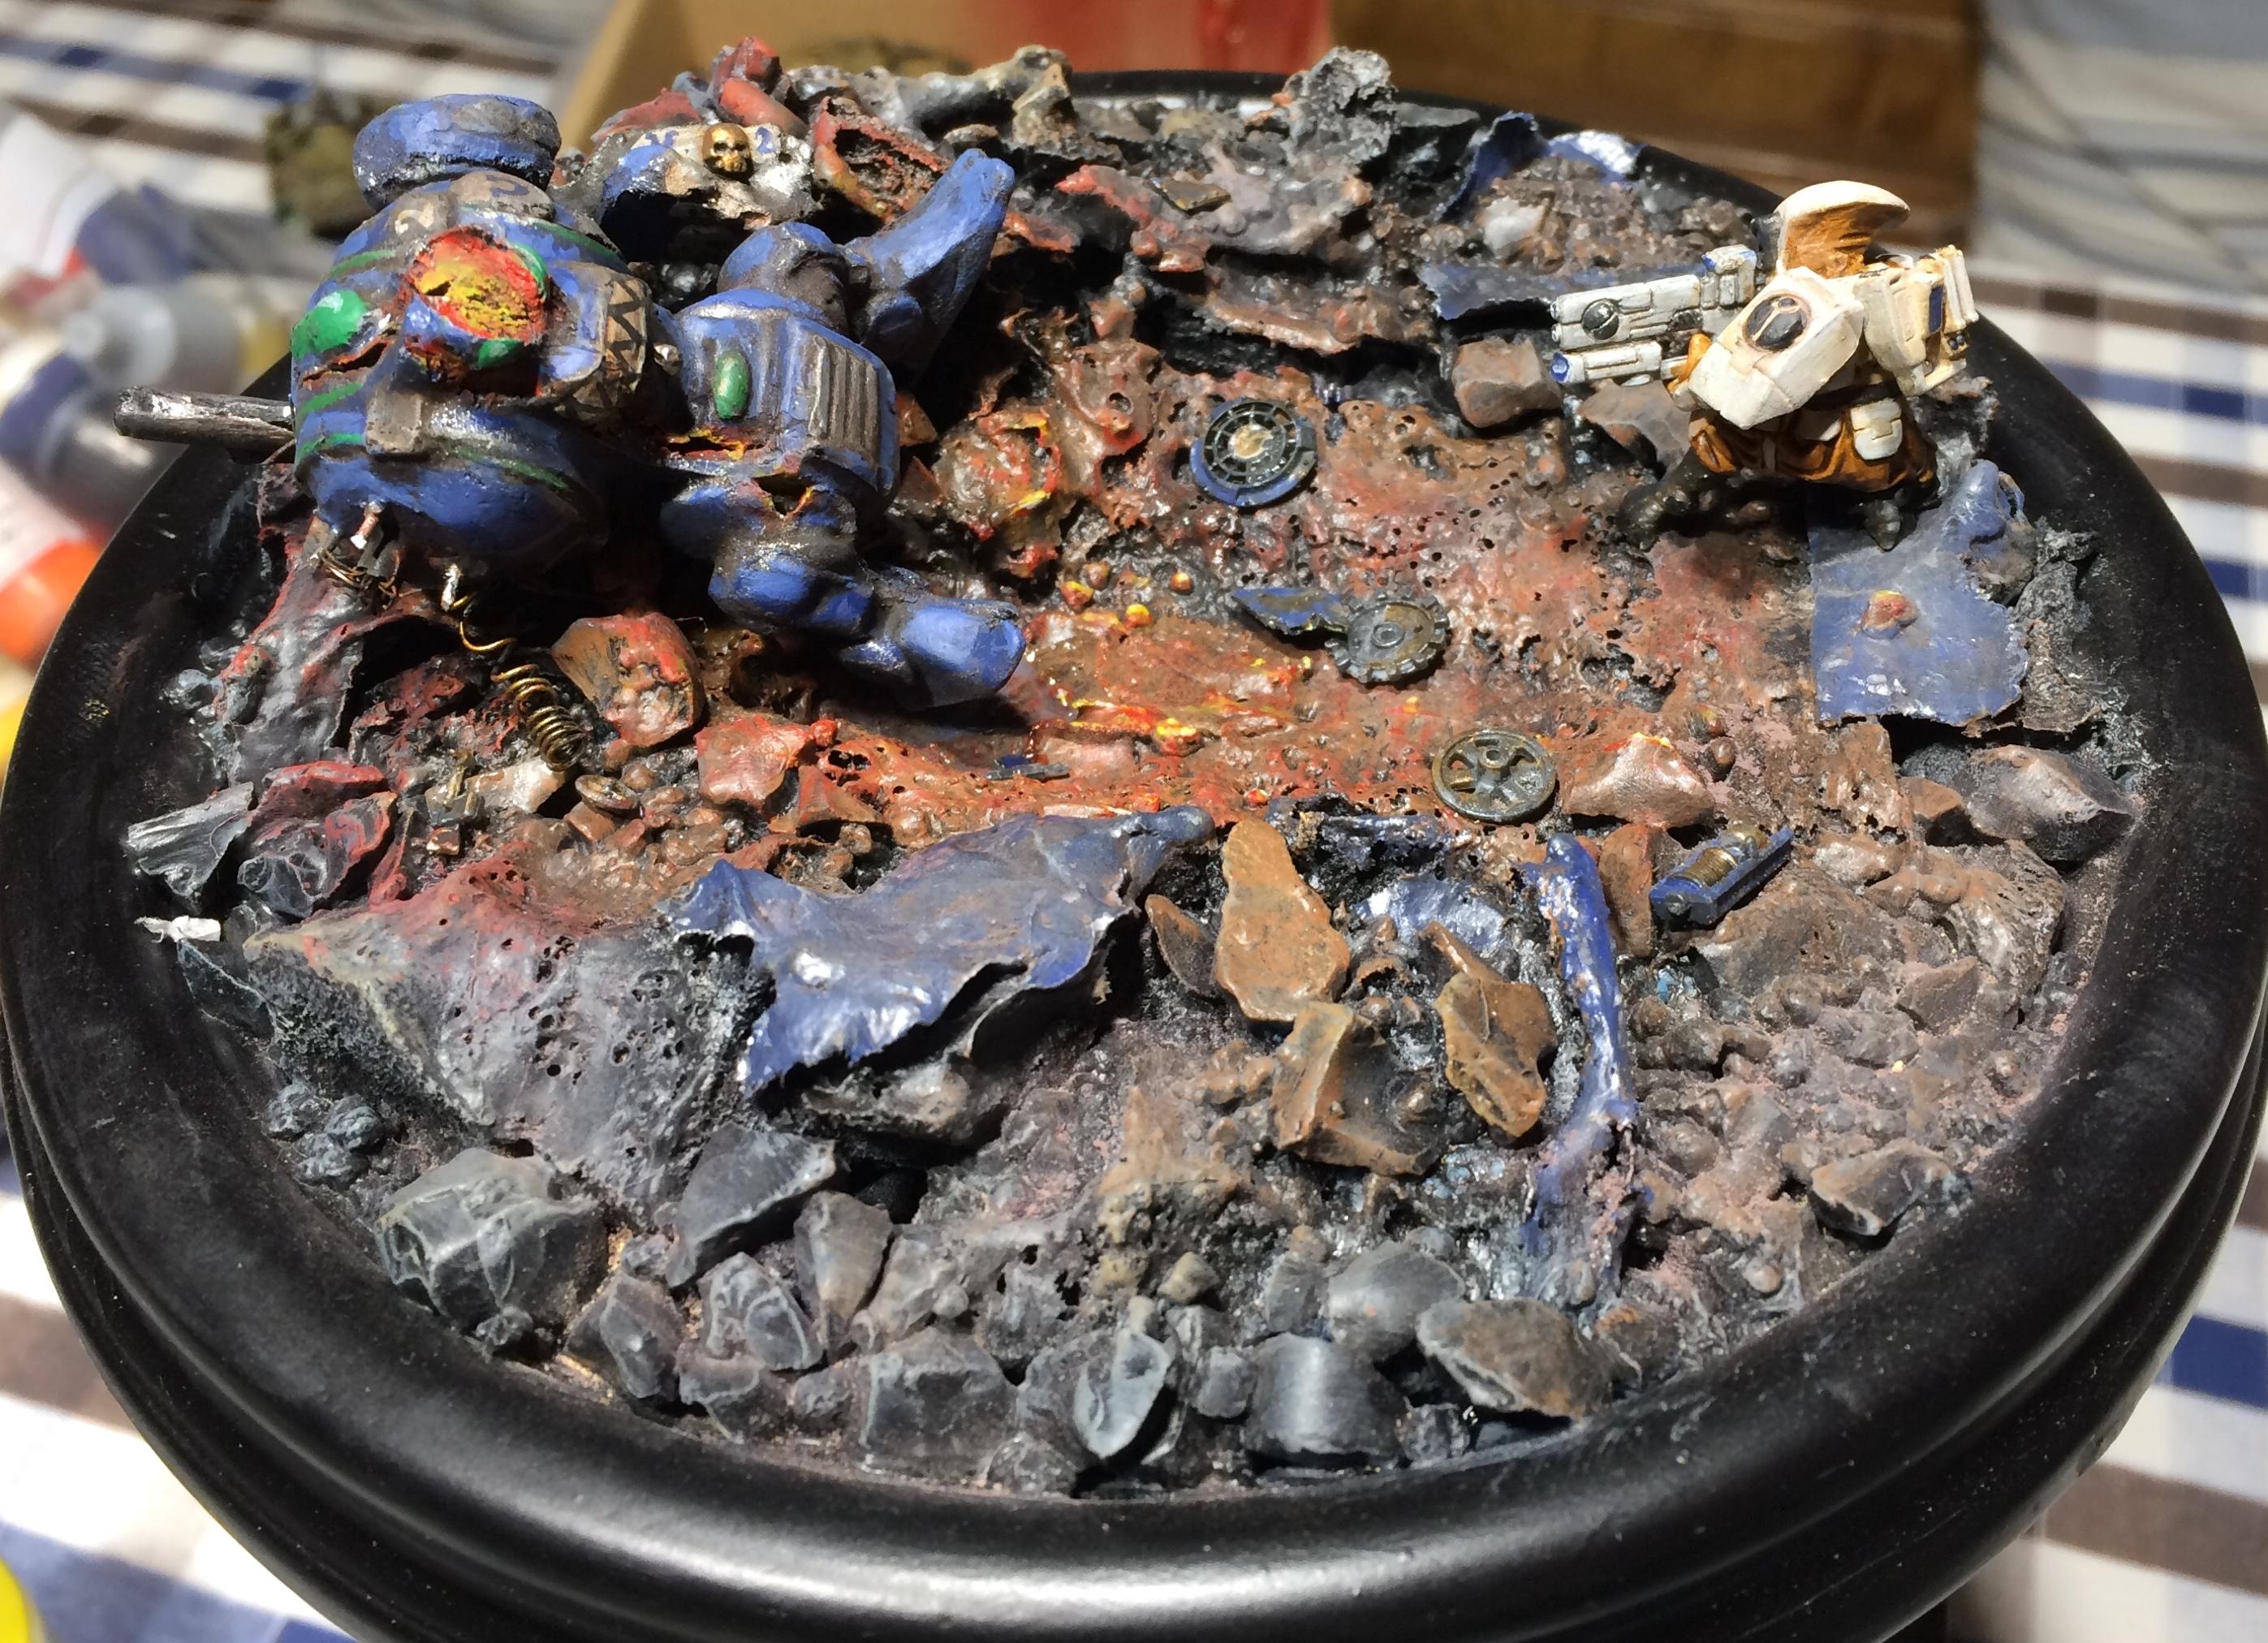 Action, Diorama, Dreadnought, Fight, Oldhammer, Powerful, Super, Tau, Versus, Vingette, Weapon